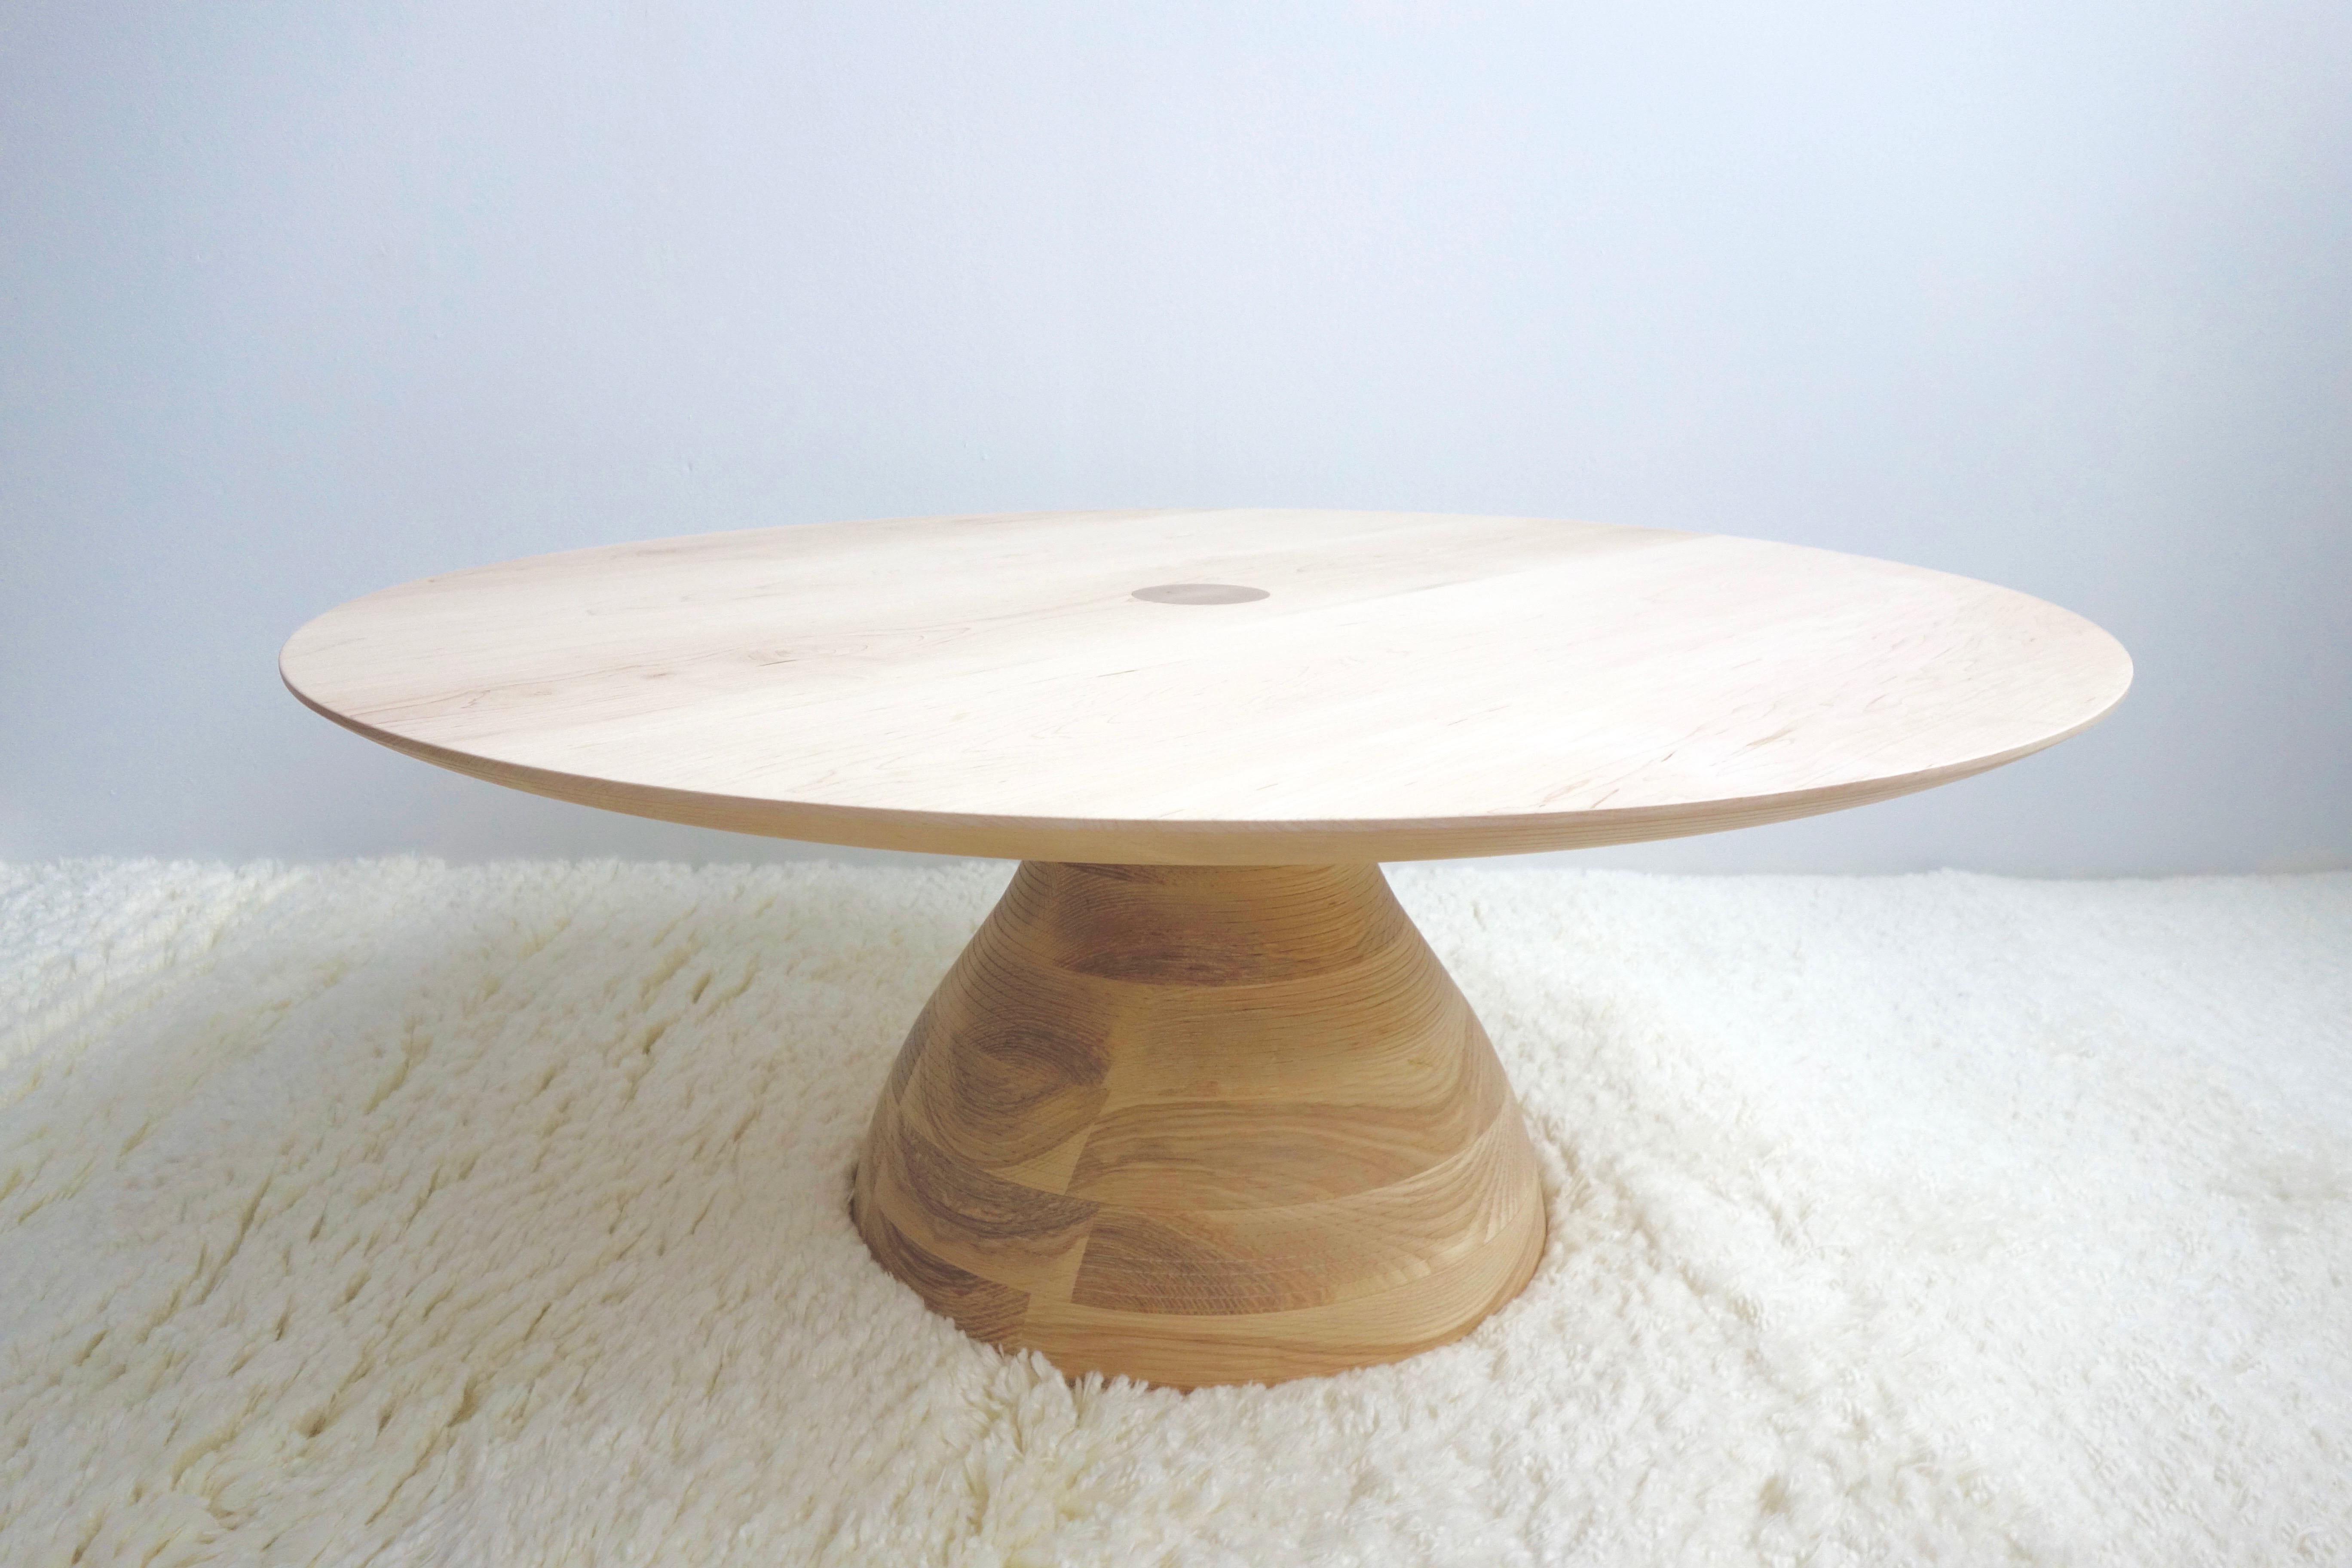 The ash base is stack-laminated and then turned on a large lathe. The tabletop of selected hardwoods is also mounted and turned to achieve its tapered and grooved edge detail. Voluminous yet elegant, sculptural, and simple. The table comes in